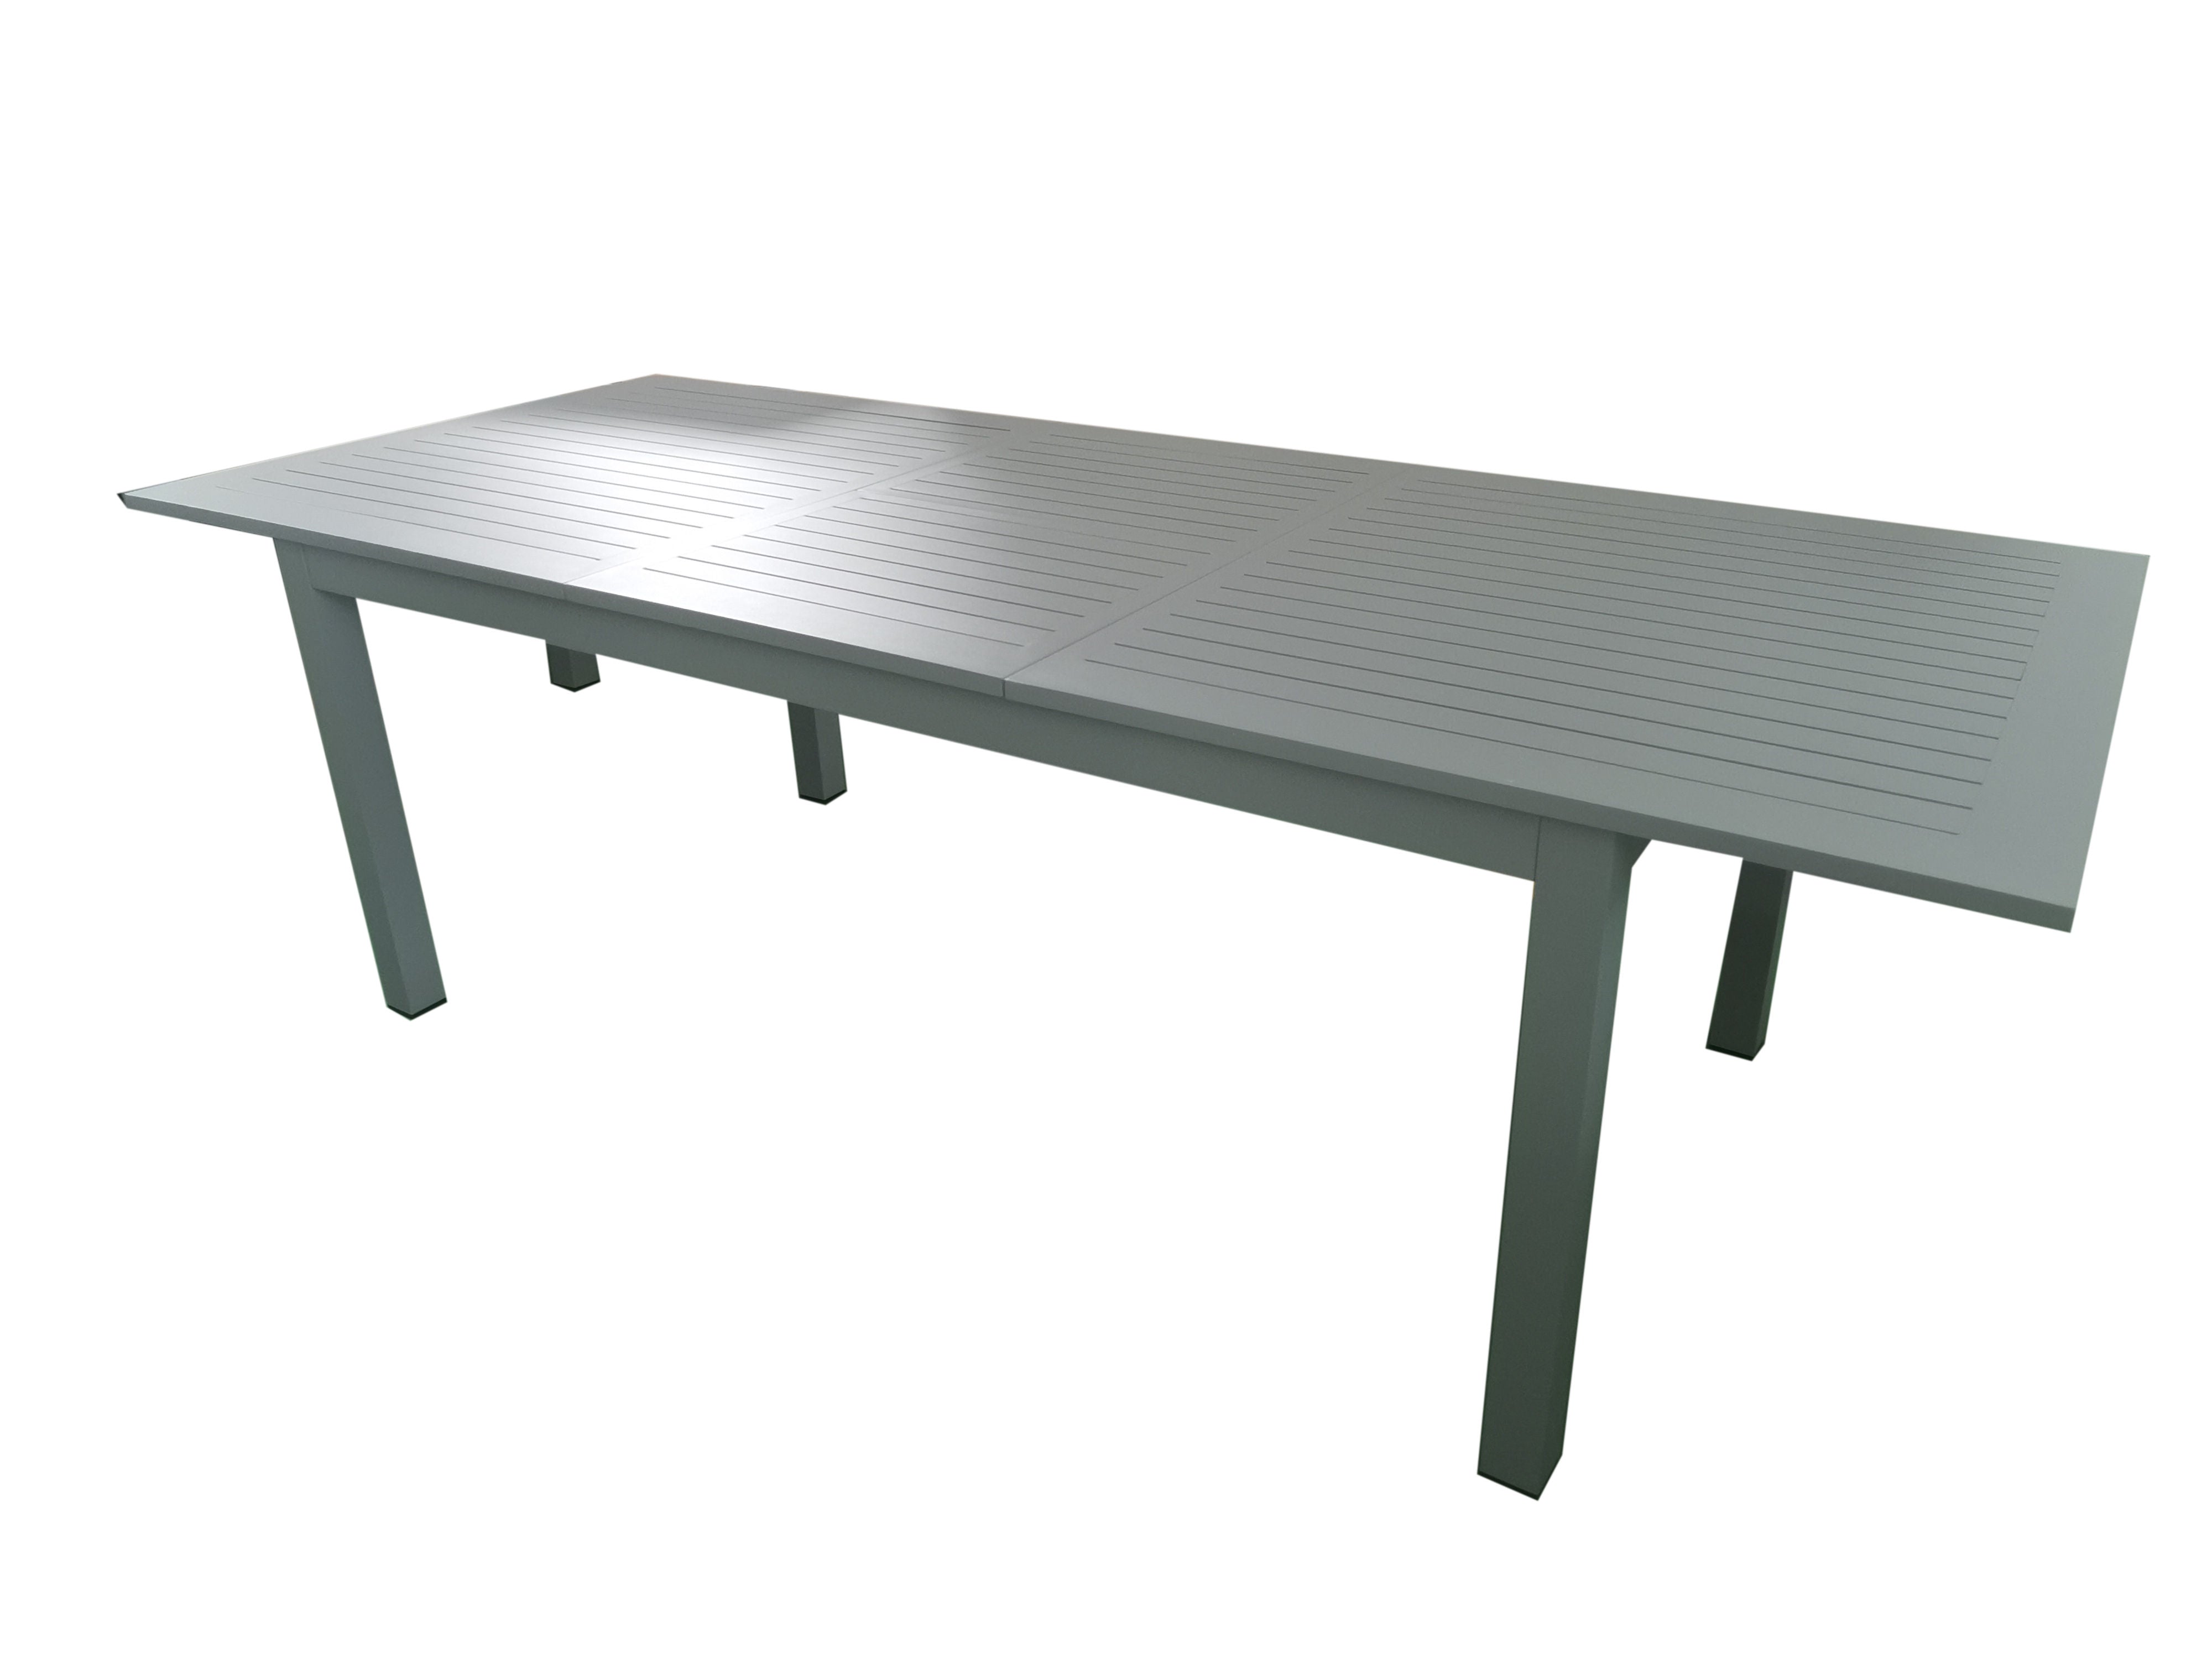 PatioZone Extendable Dining Table with Slated Tabletop (Butterfly Mechanism) Aluminum Frame (MOSS-T206GP) - Matte Light Grey